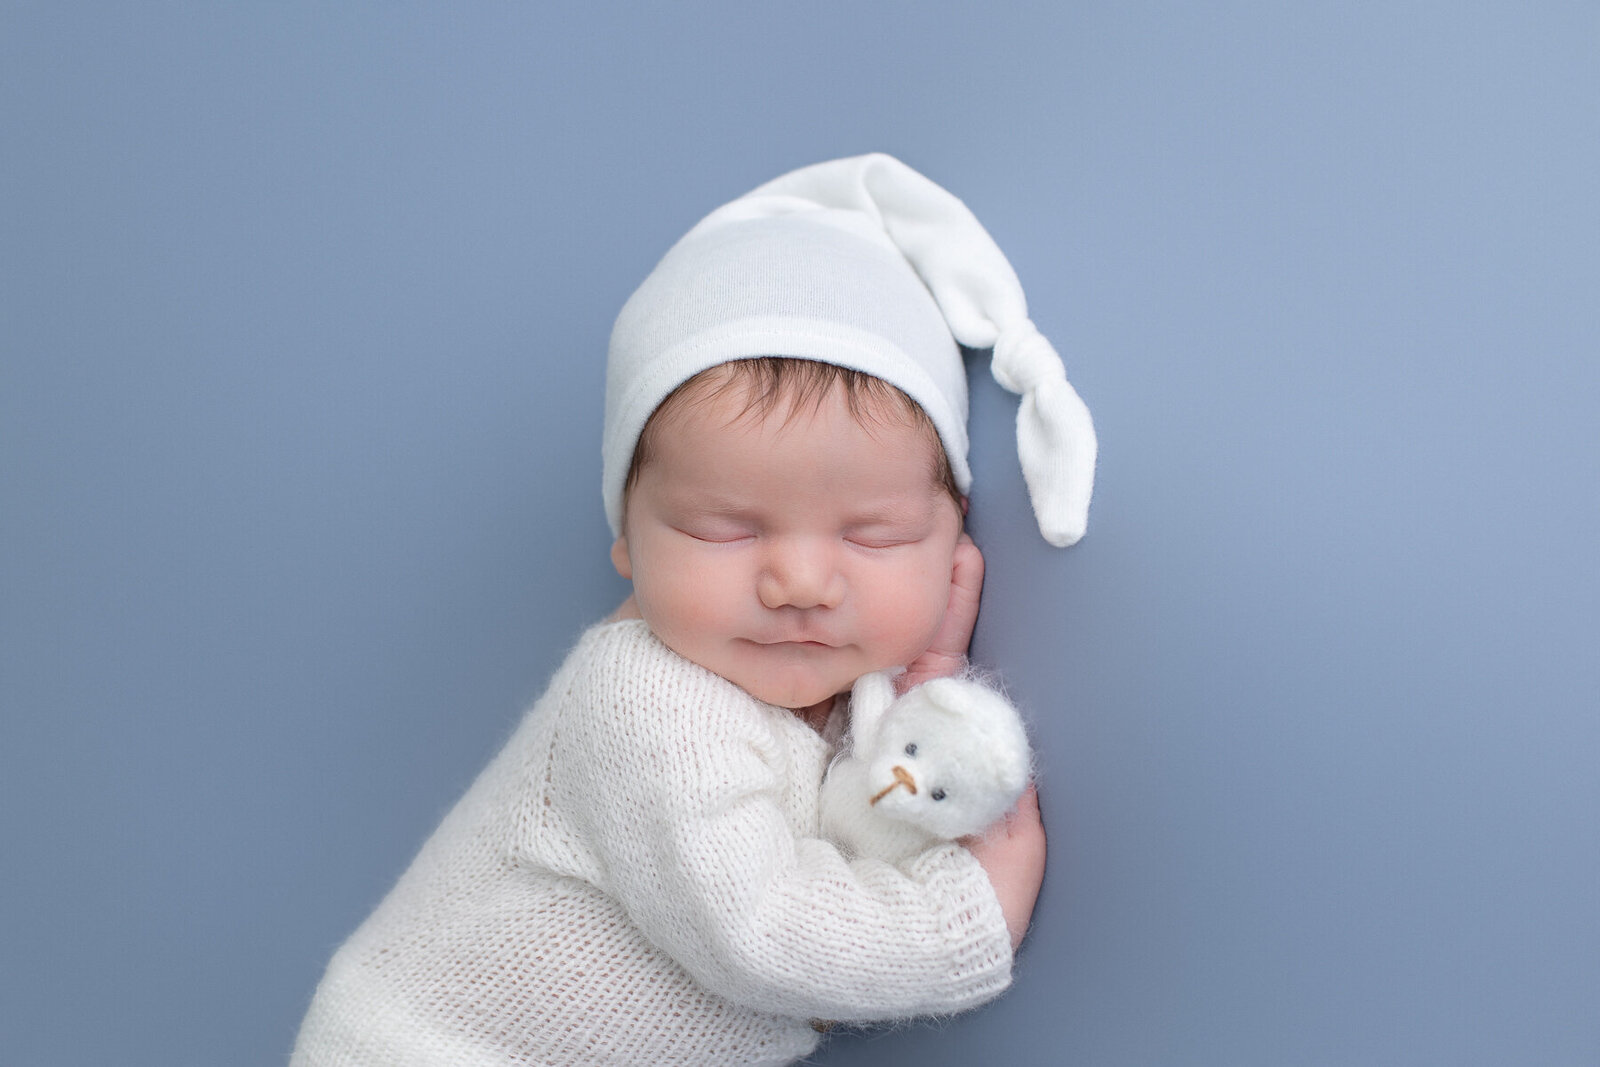 Baby_boy_in-home_newborn-lifestyle-photography-session-Georgetown-KY-photographer